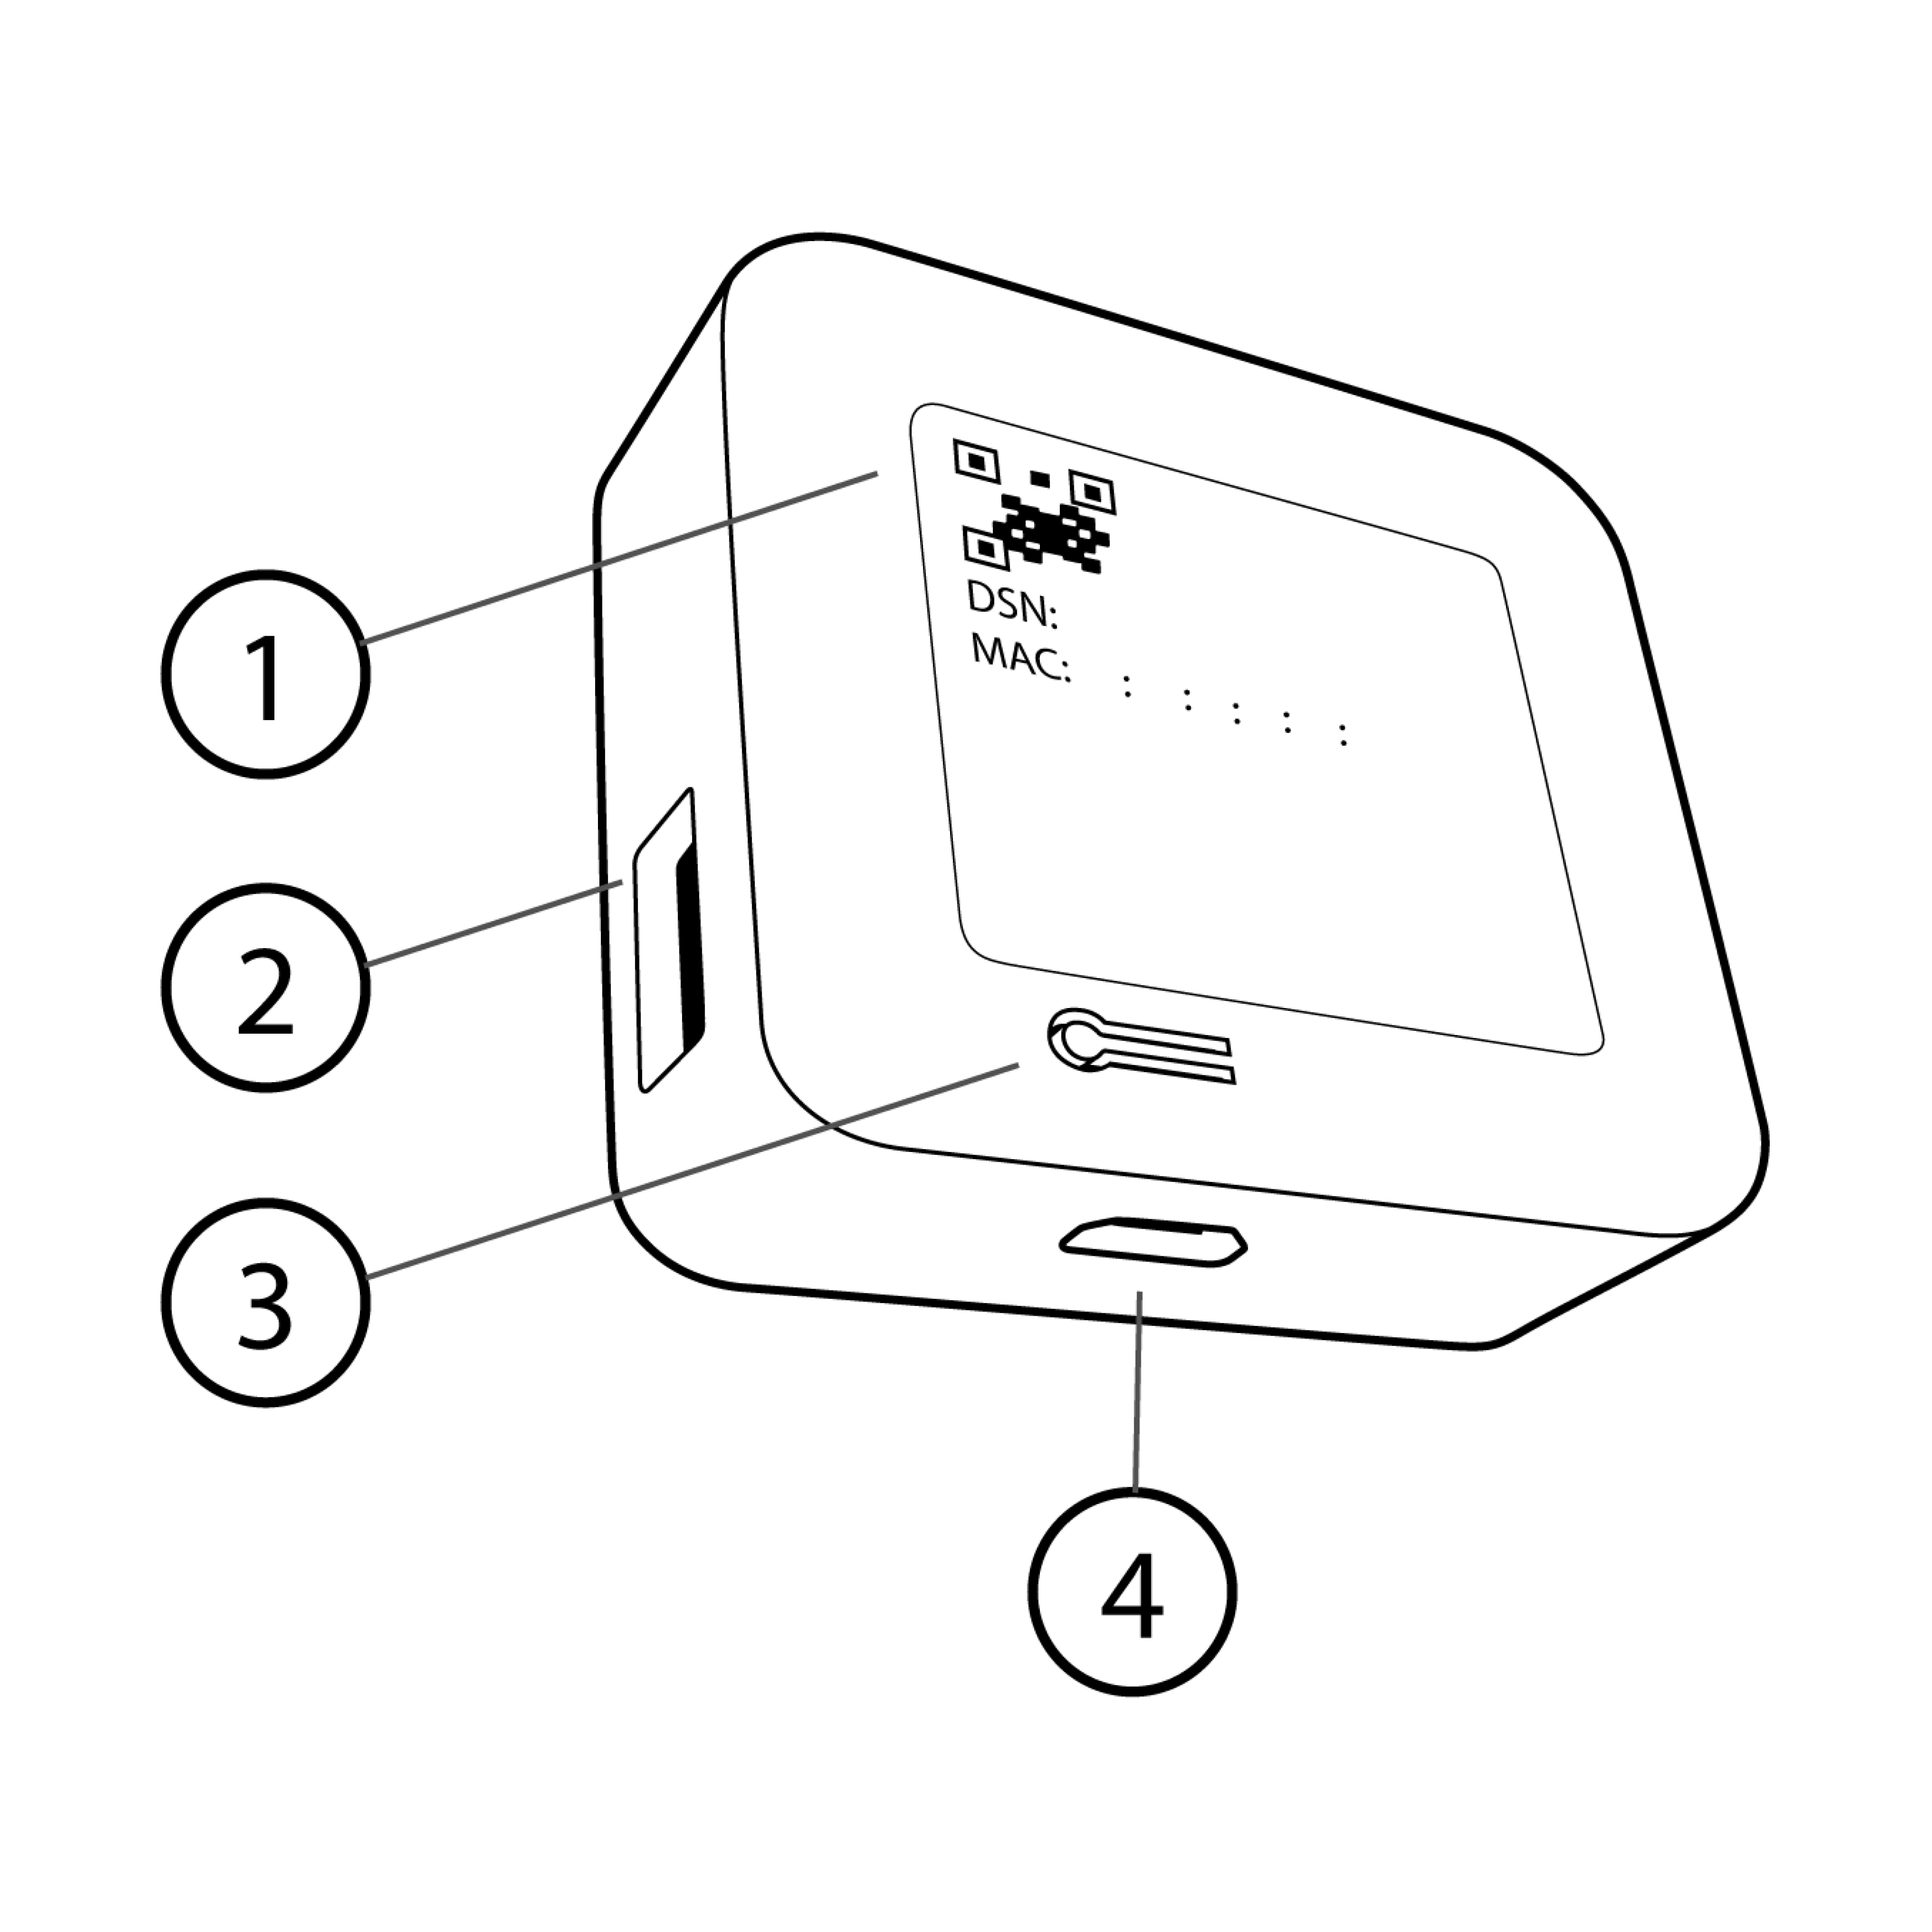 Image showing a sync module with numbered parts including QR code, USB port, reset button, and power port.